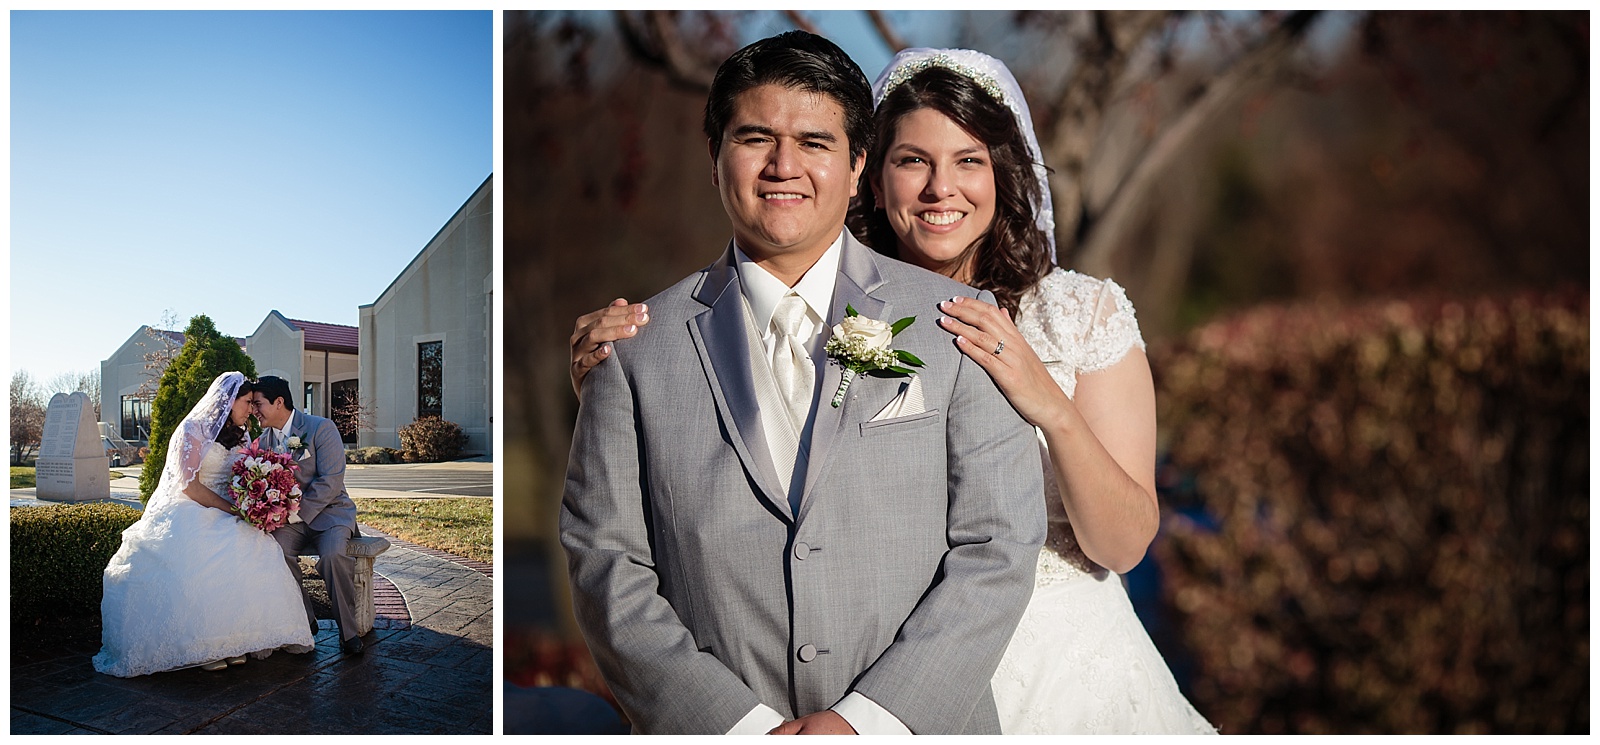 Wedding photography at Church of the Ascension in Overland Park, Kansas.